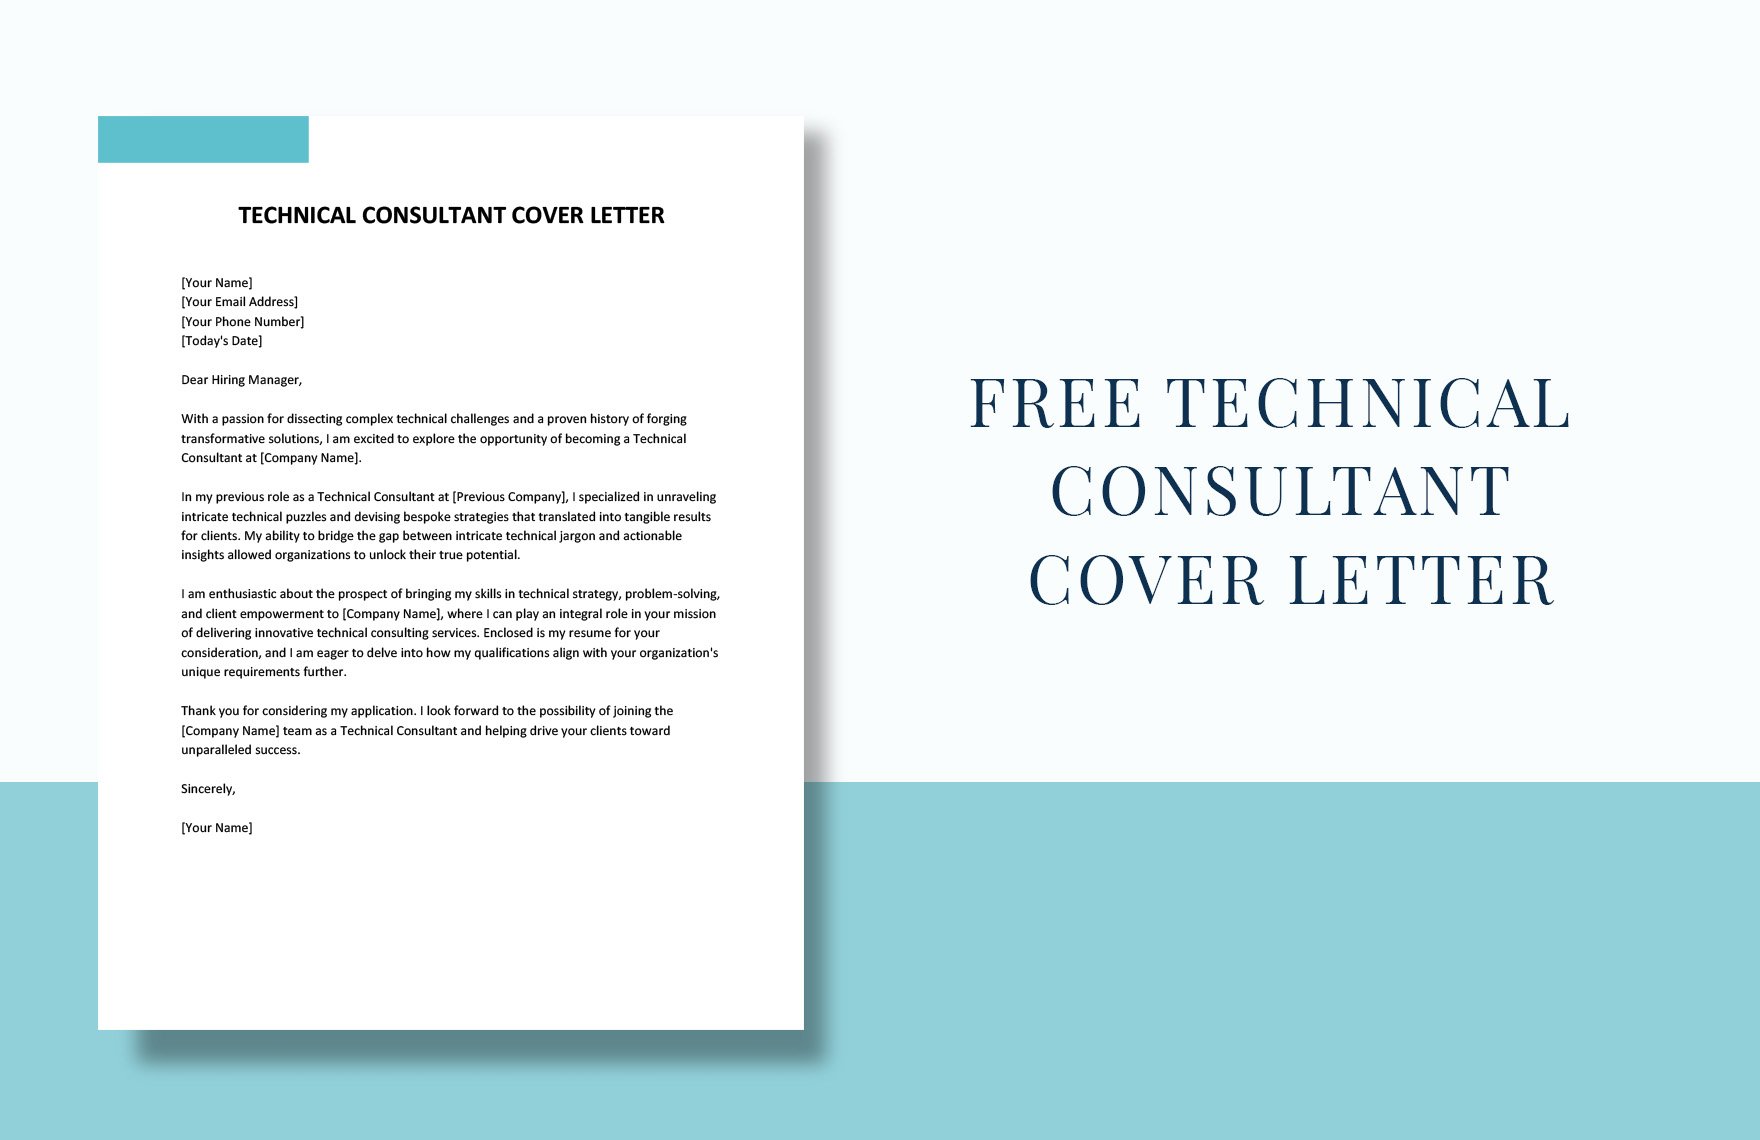 Technical Consultant Cover Letter